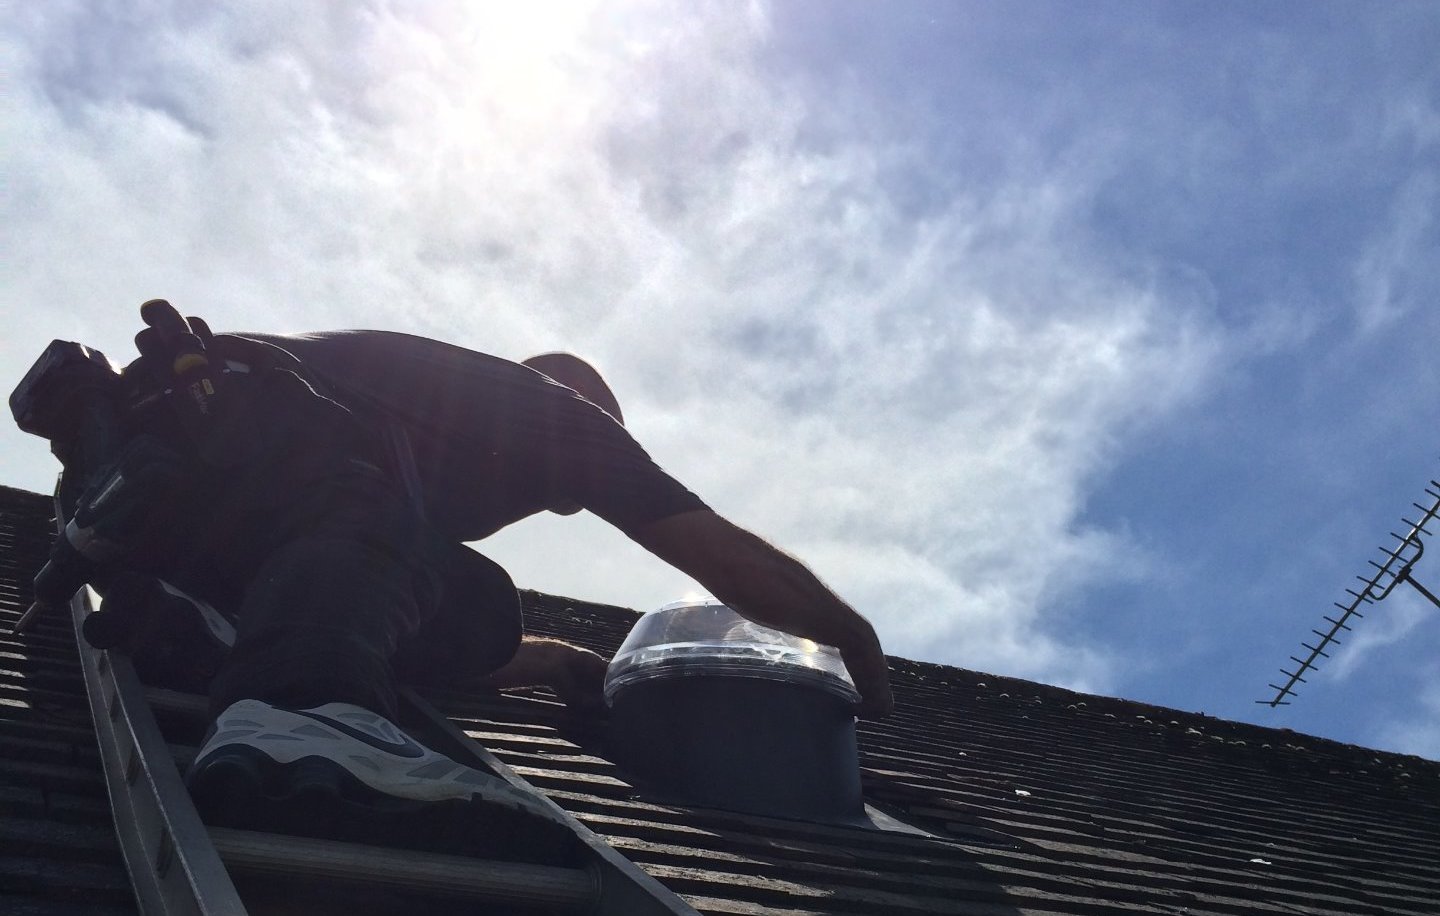 Solatube installer installing a roof dome from a ladder